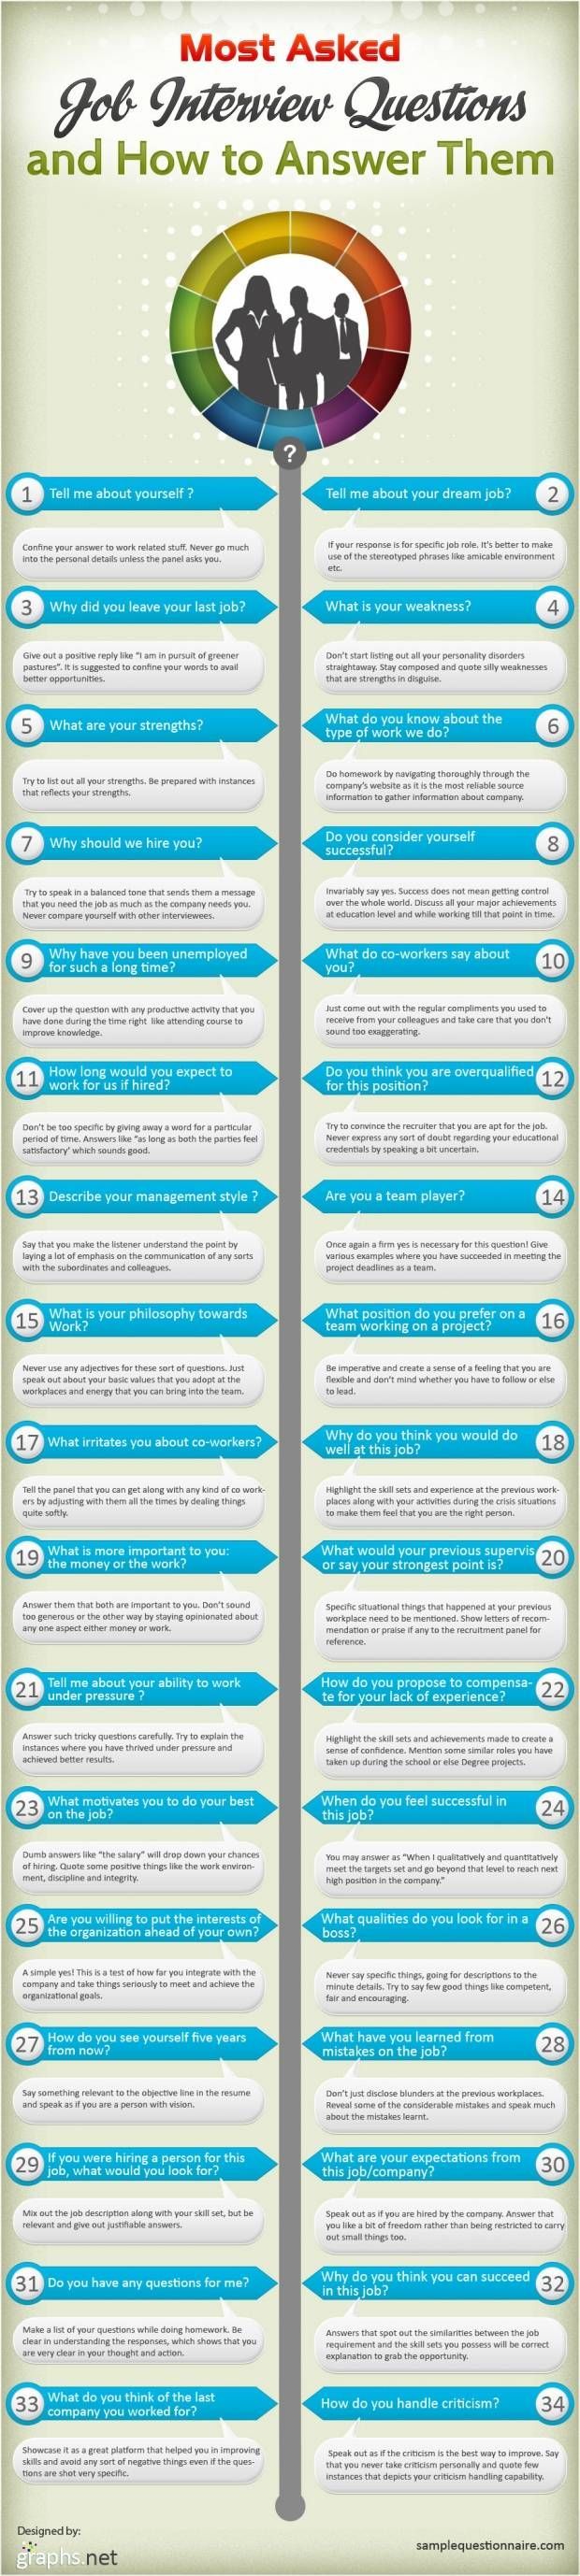 Most Asked Job Interview Questions and How to Answer Them | NerdGraph Infographi